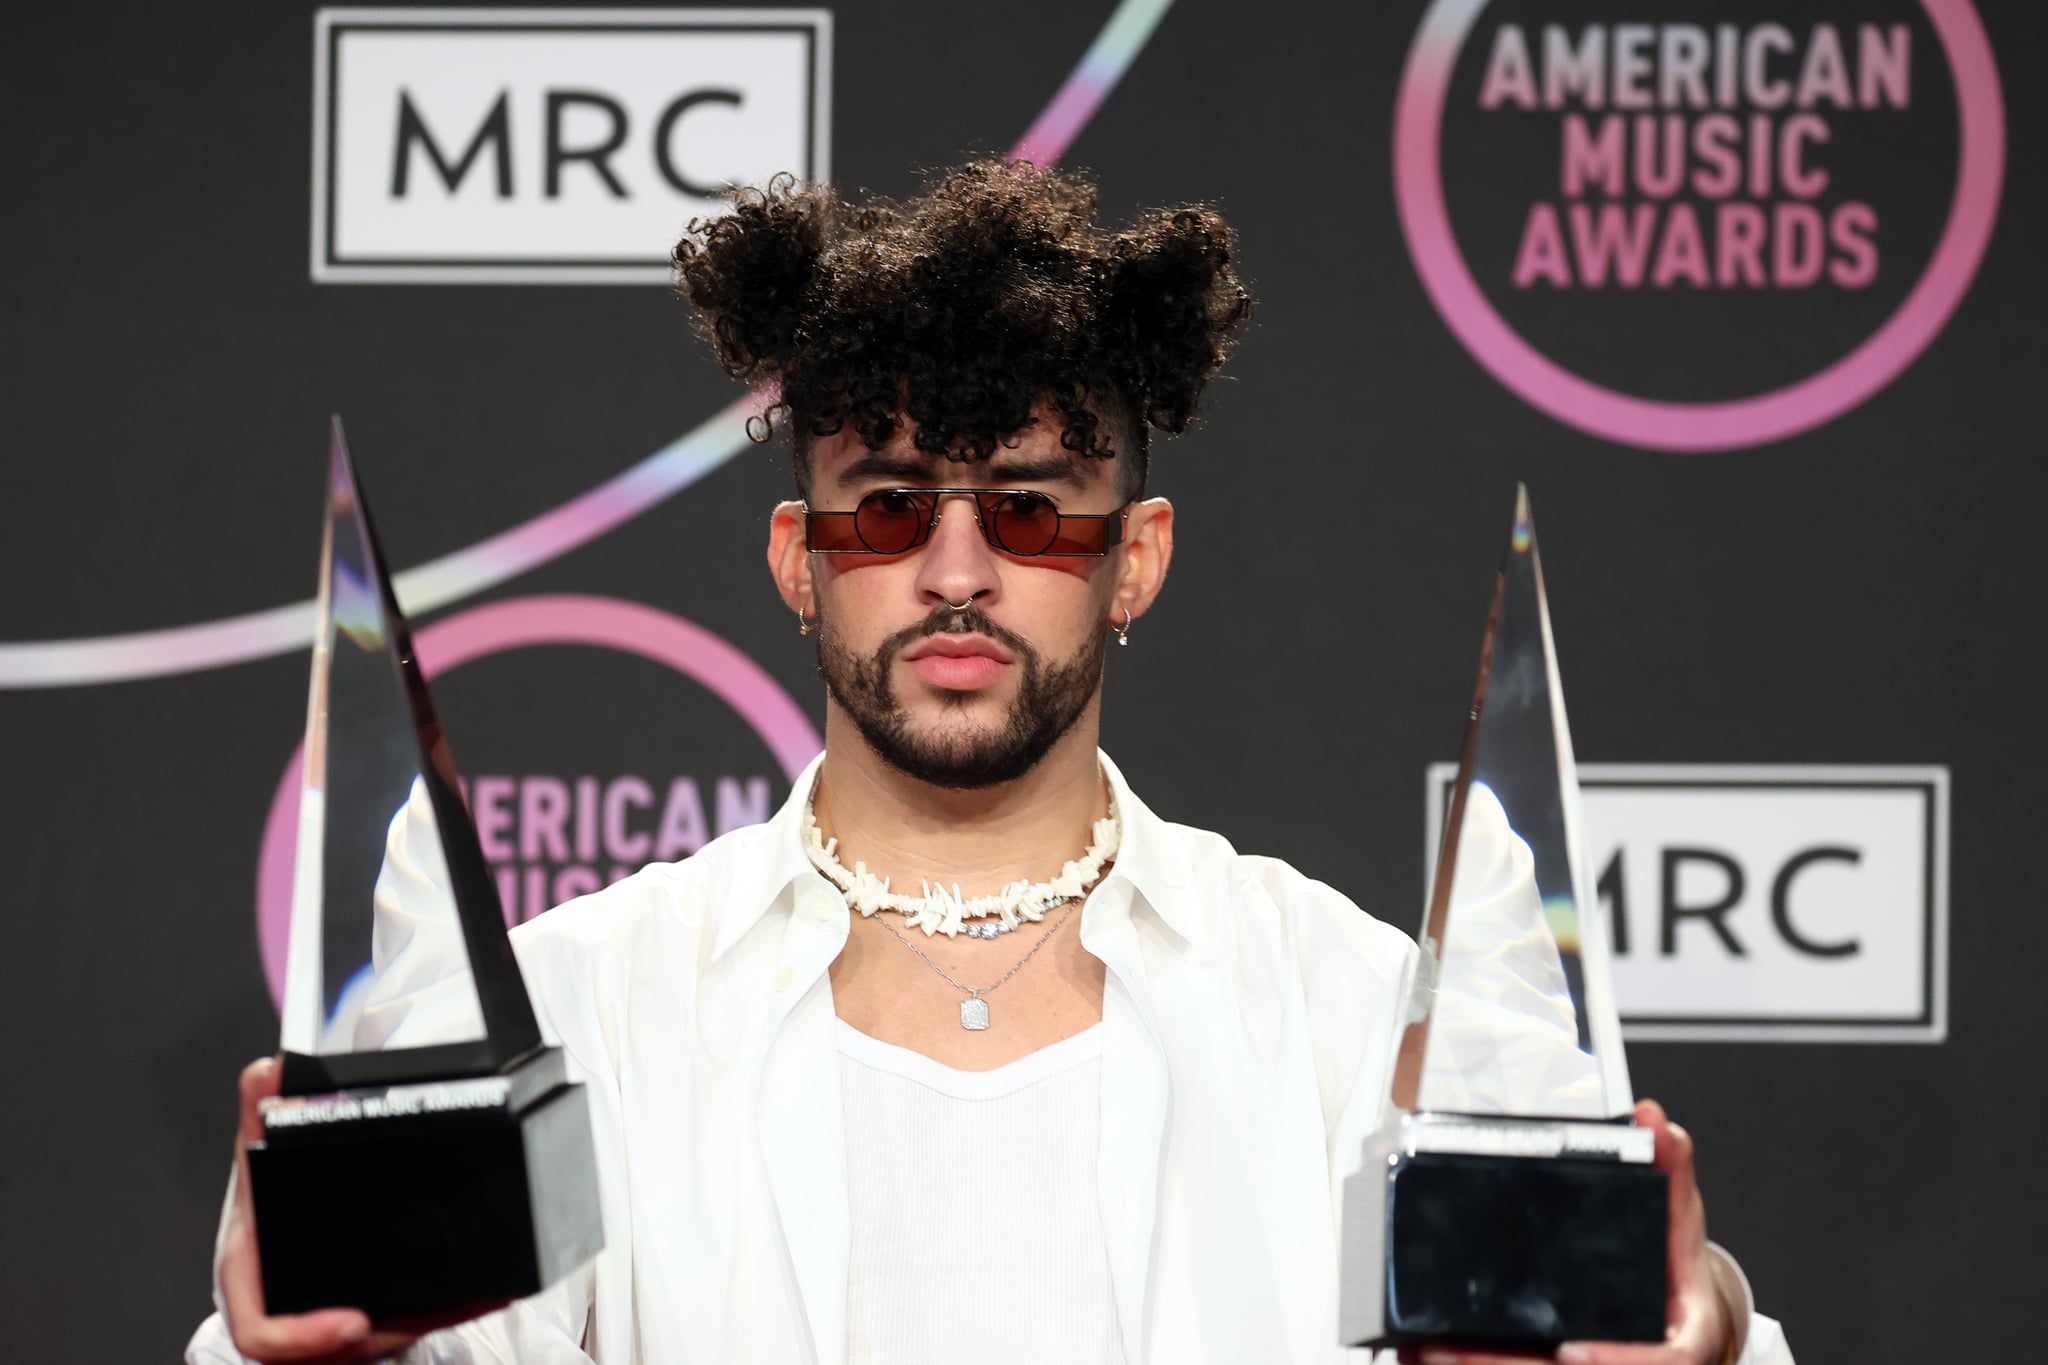 LOS ANGELES, CALIFORNIA - NOVEMBER 21: Bad Bunny, winner of the Favorite Male Latin Artist award, poses in the press room at the 2021 American Music Awards at Microsoft Theater on November 21, 2021 in Los Angeles, California. (Photo by Matt Winkelmeyer/Getty Images for MRC)